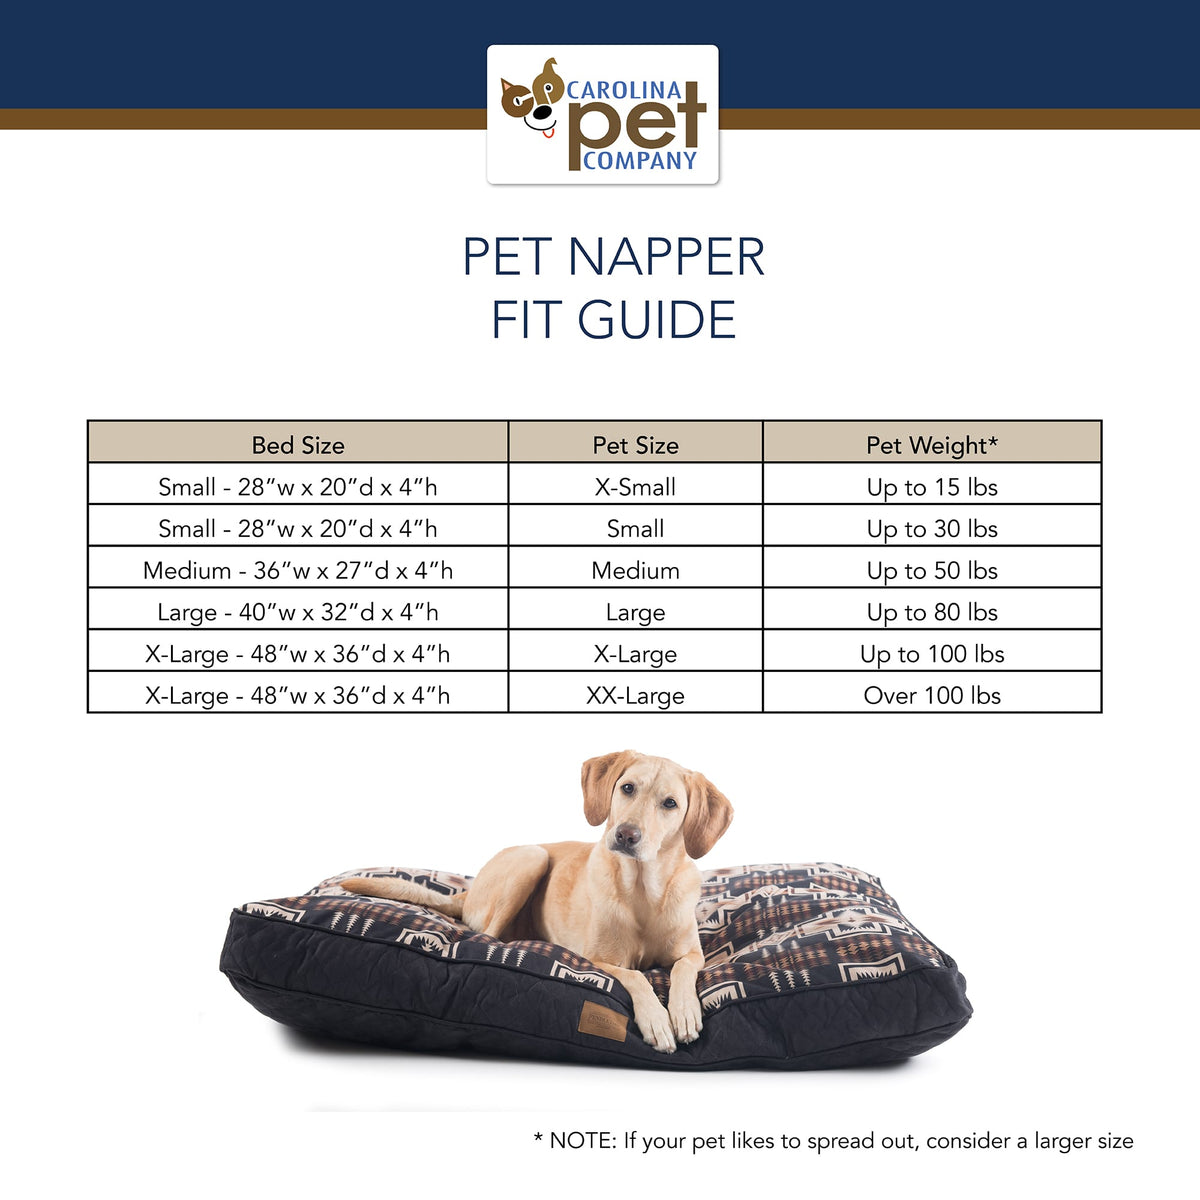 Acadia National Park Pet Napper - 3 Red Rovers